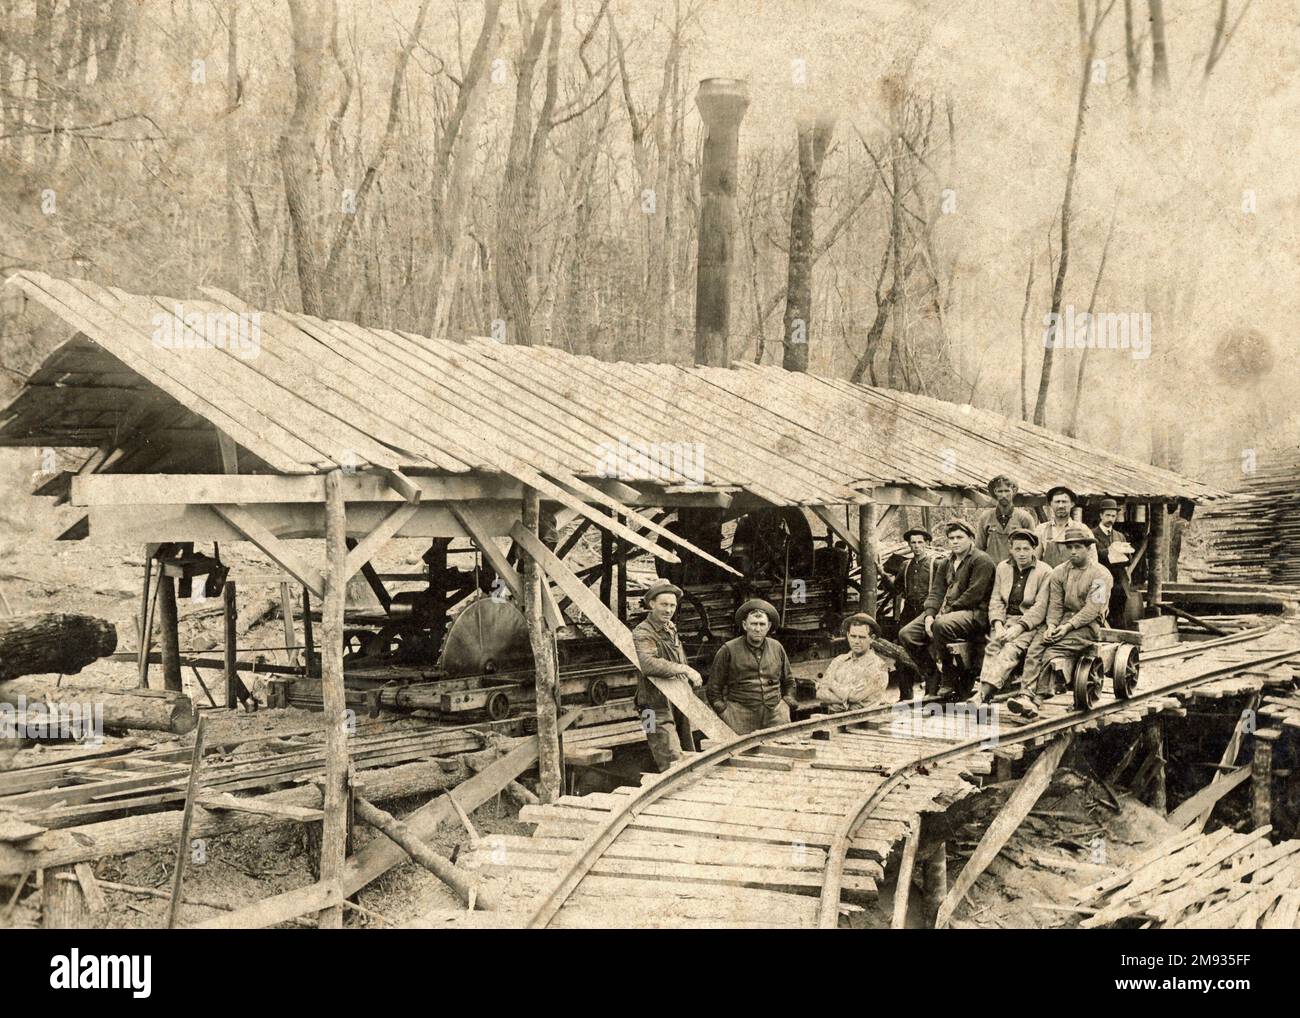 Logging about 1900,  Sawmill Turn of the Century, Stock Photo